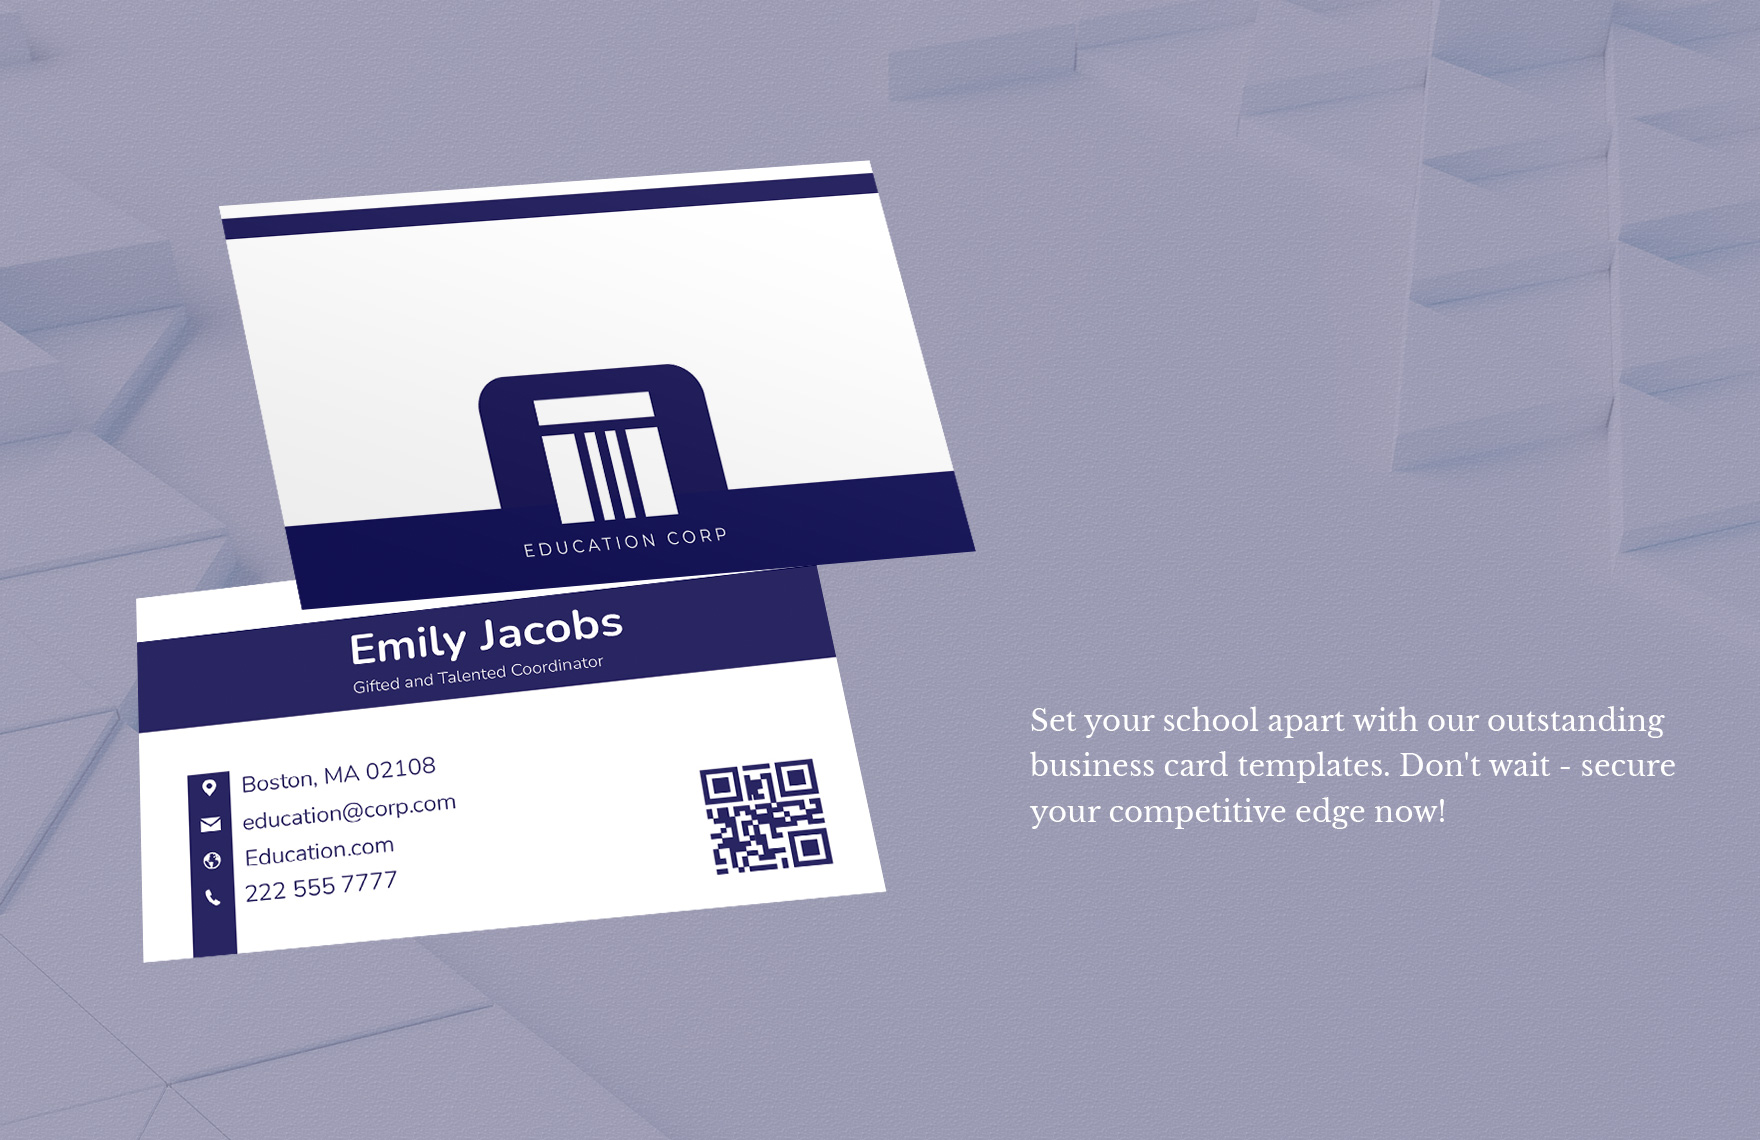 Gifted and Talented Coordinator Business Card Template